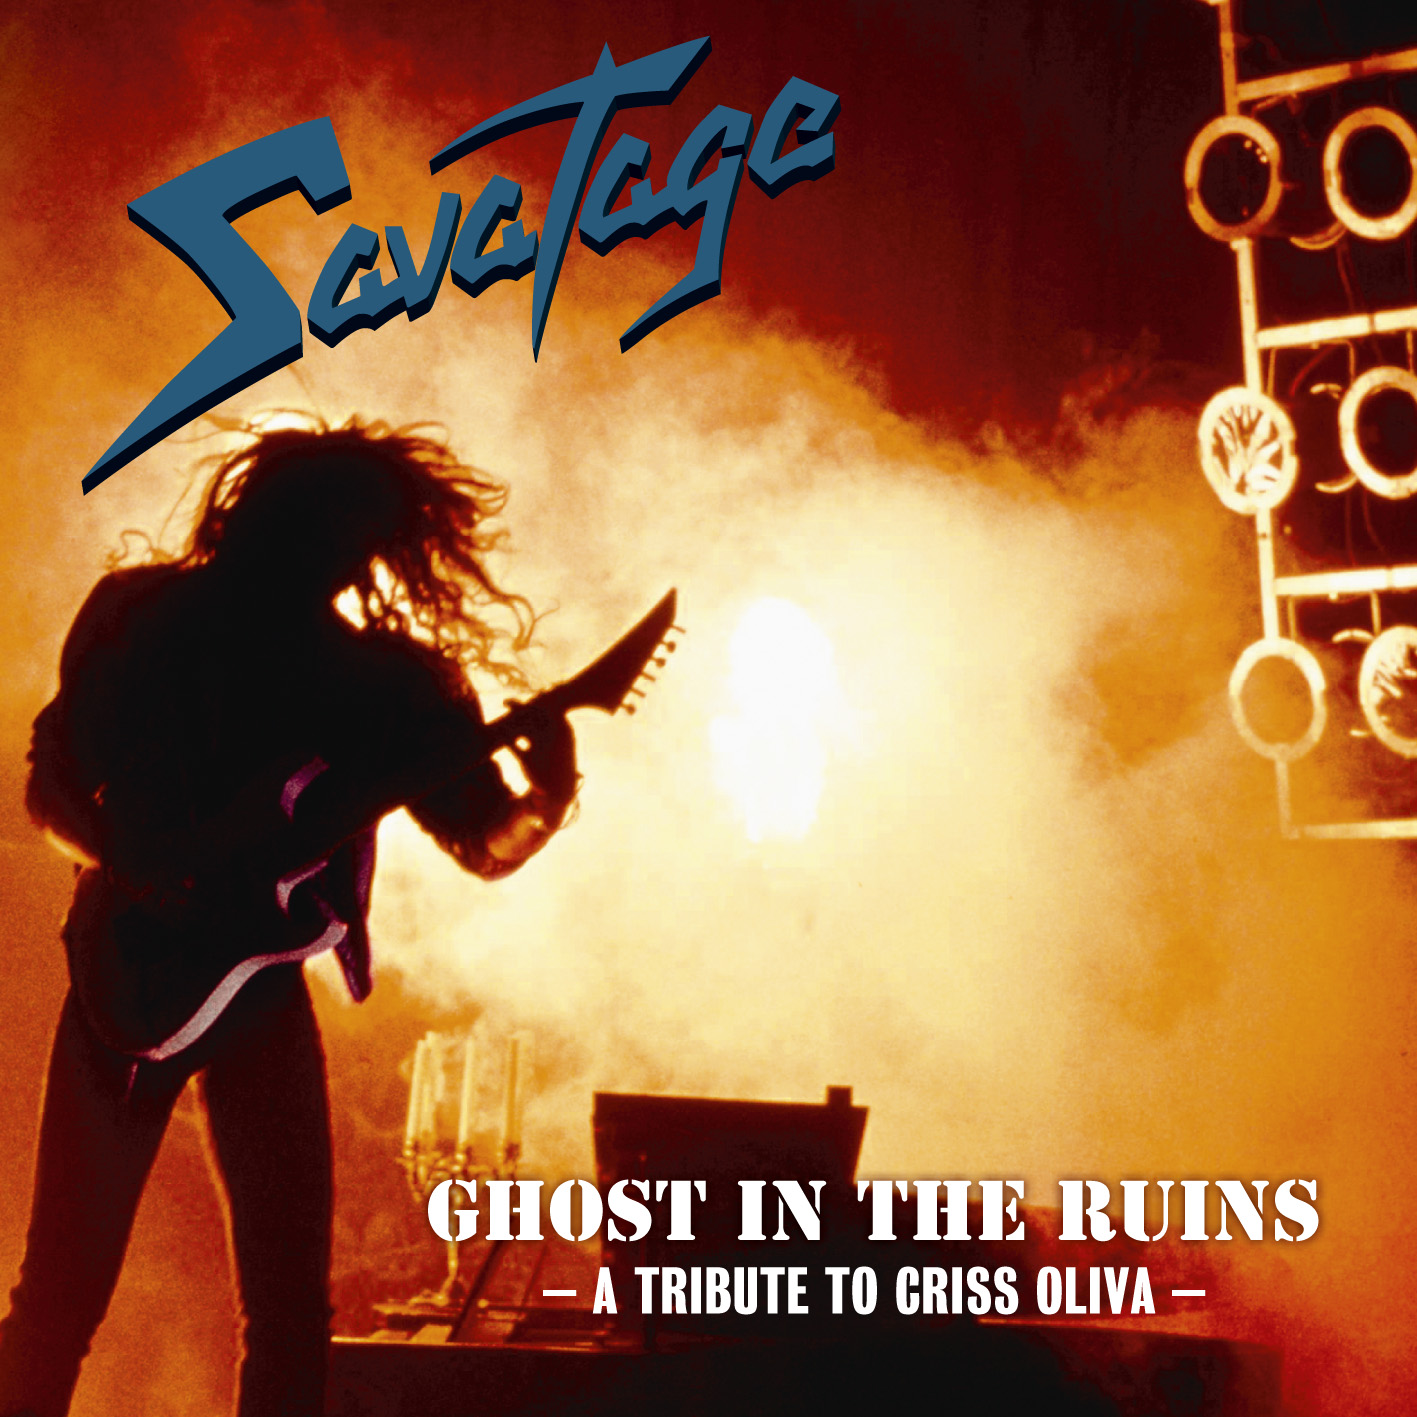 Savatage - Ghost In The Ruins - CD